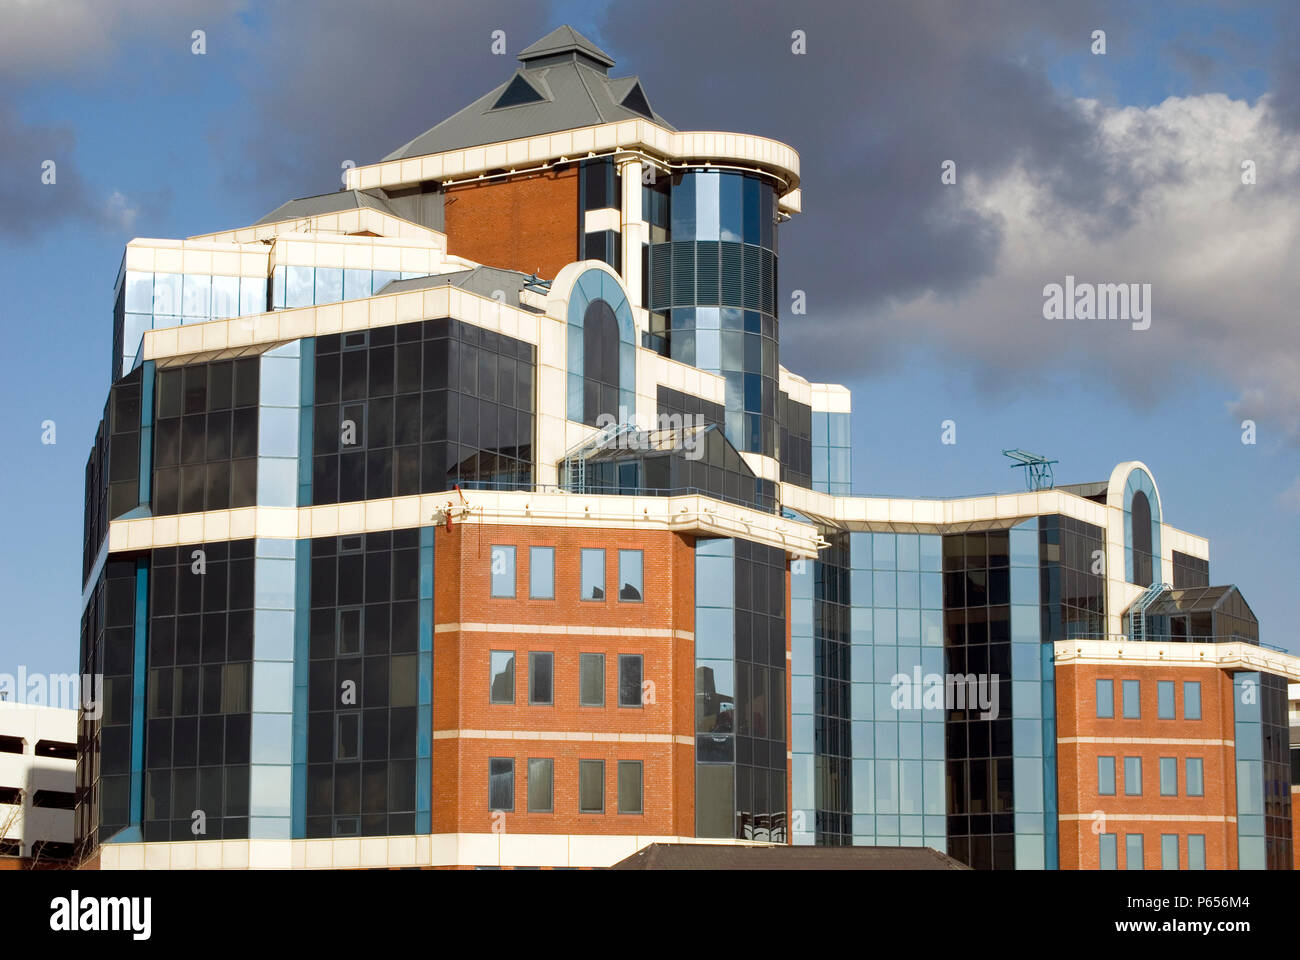 Victoria Building, Salford Quays, Manchester, UK Stock Photo